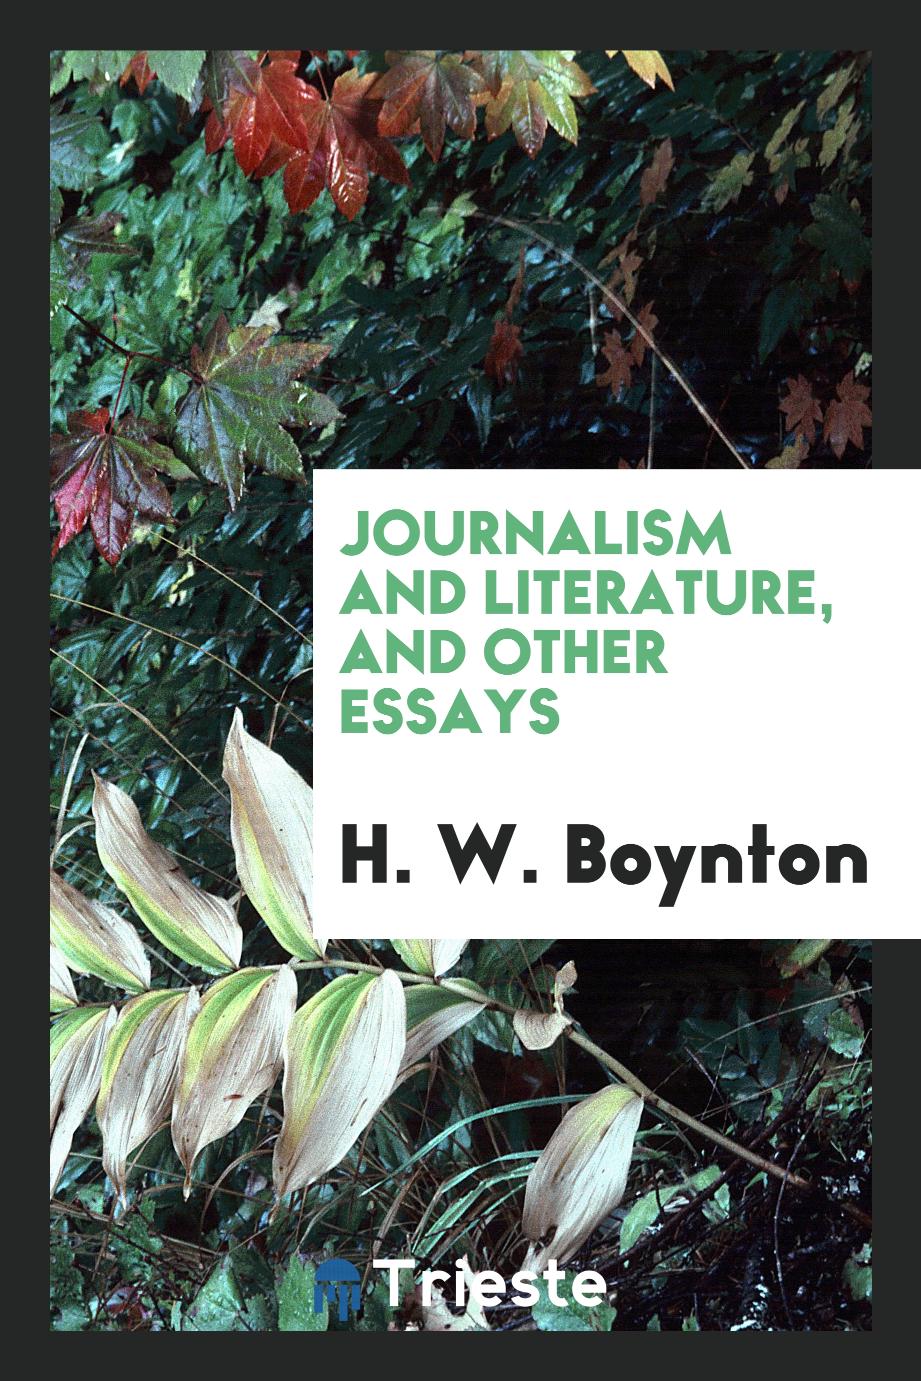 Journalism and literature, and other essays